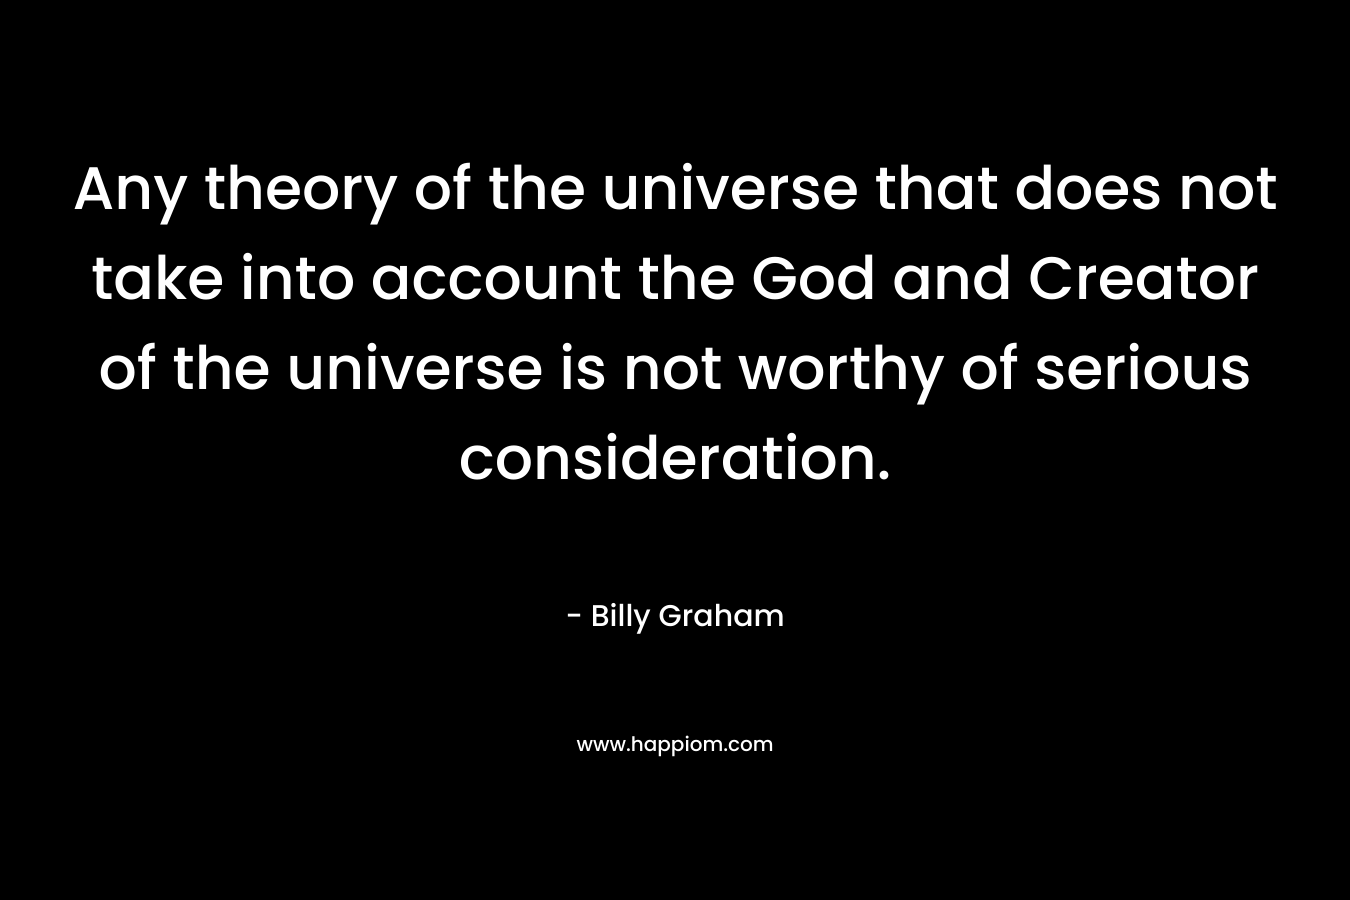 Any theory of the universe that does not take into account the God and Creator of the universe is not worthy of serious consideration.